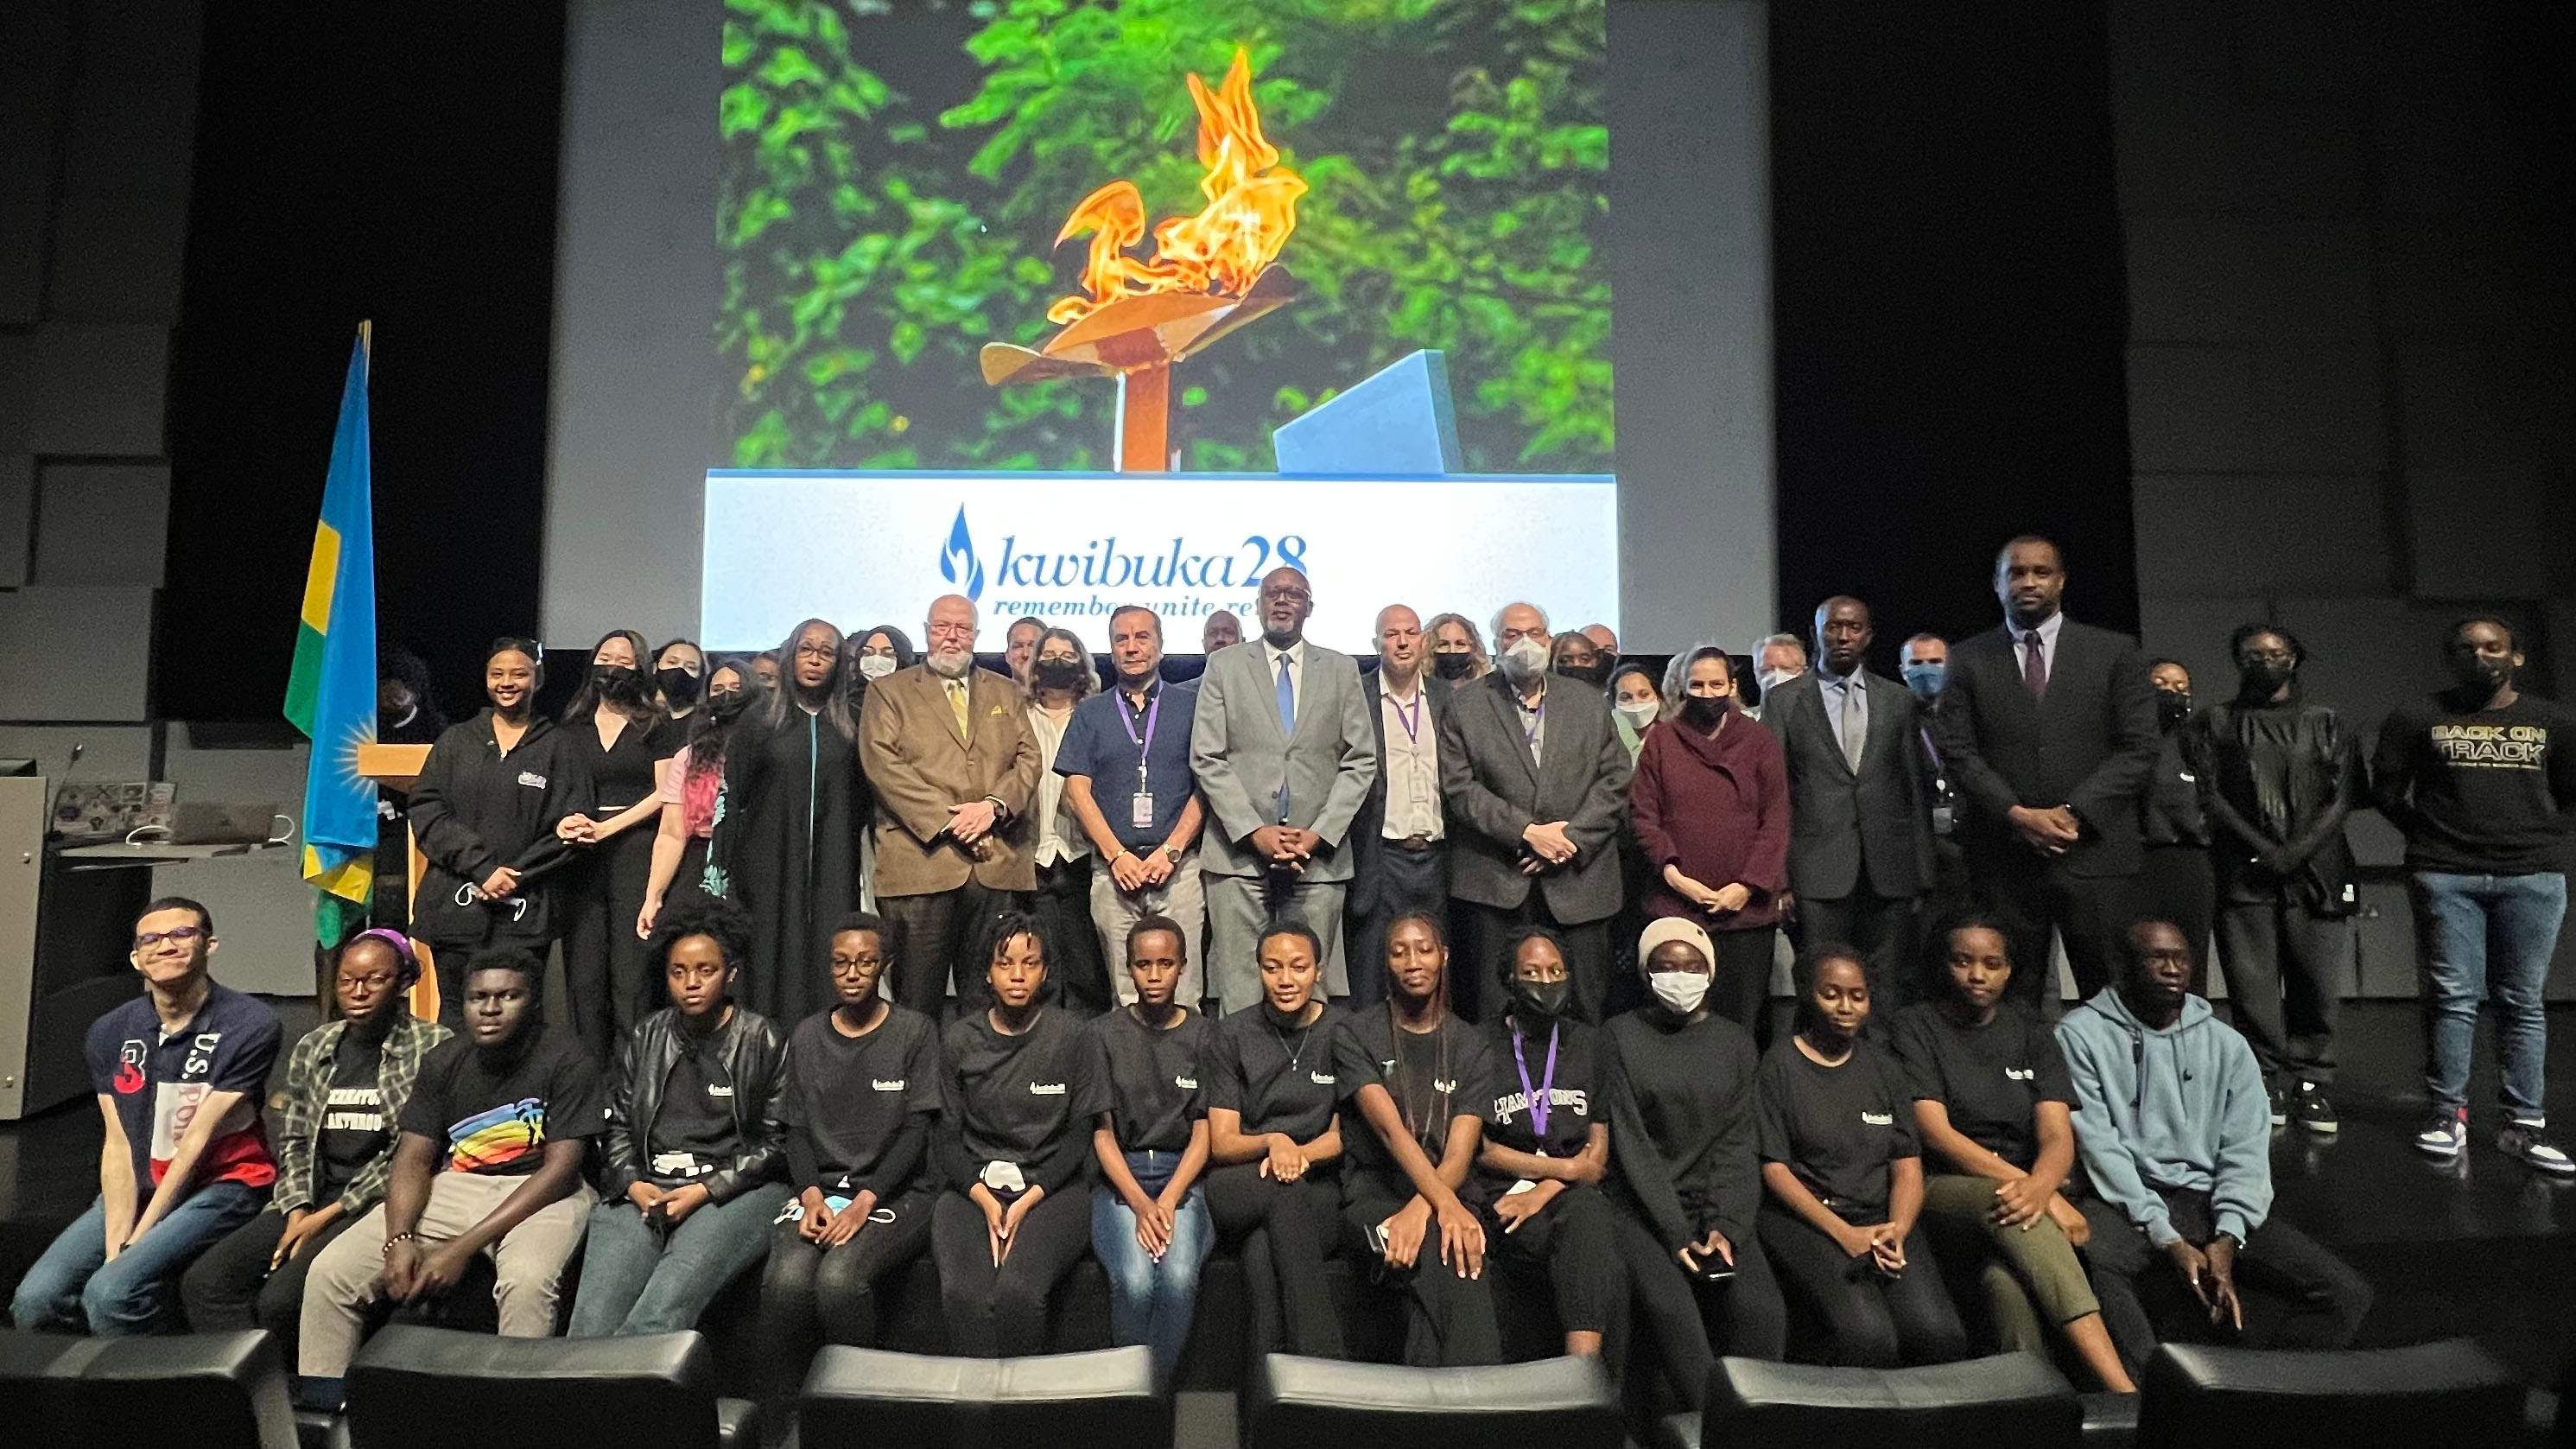 Ambassador François Nkulikiyimfura joined the event and highlighted the role Northwestern Qatar students play as journalists and storytellers in amplifying voices of hope in Rwanda and across the world